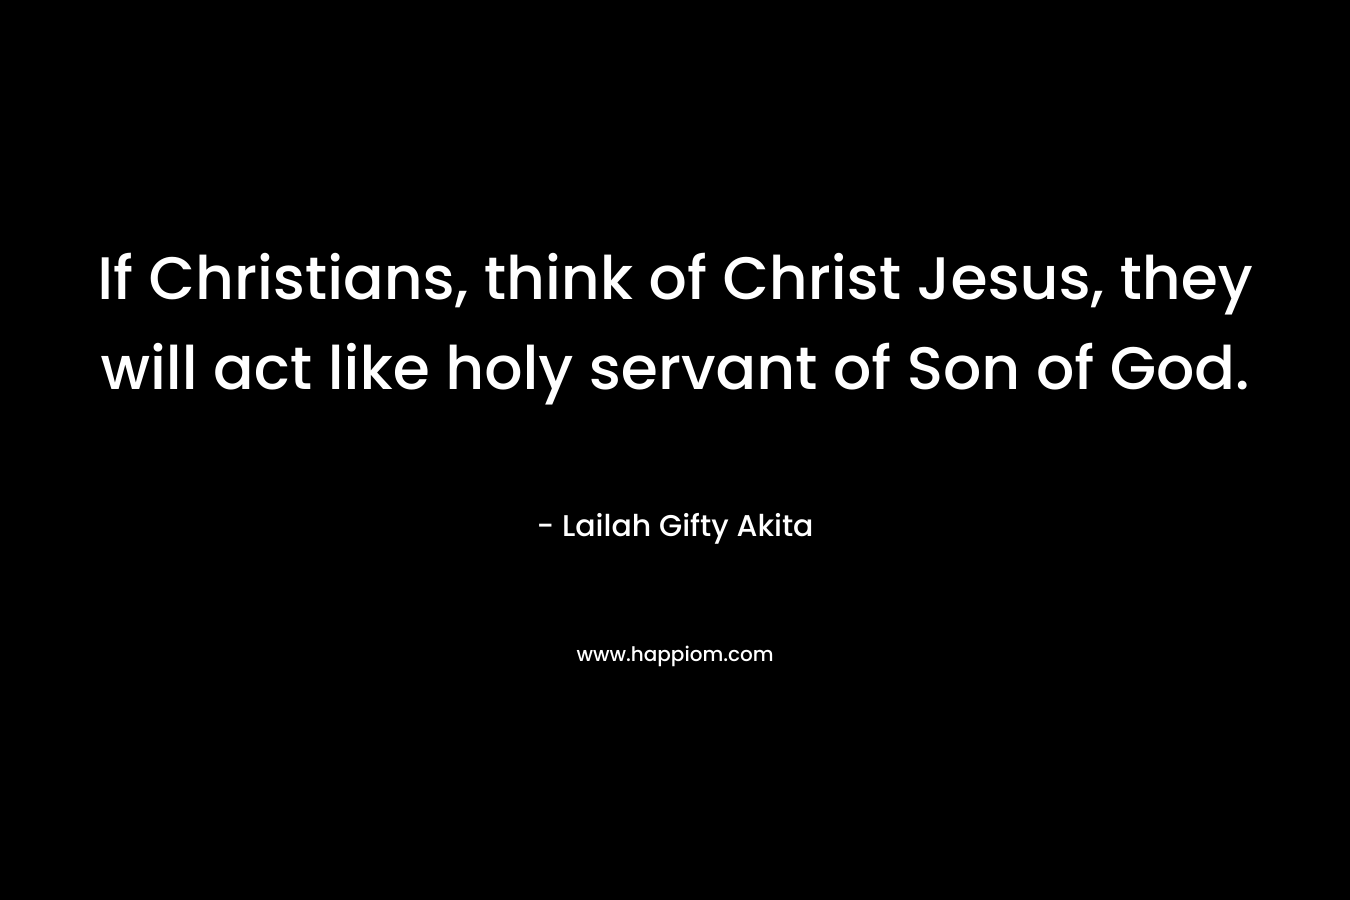 If Christians, think of Christ Jesus, they will act like holy servant of Son of God.